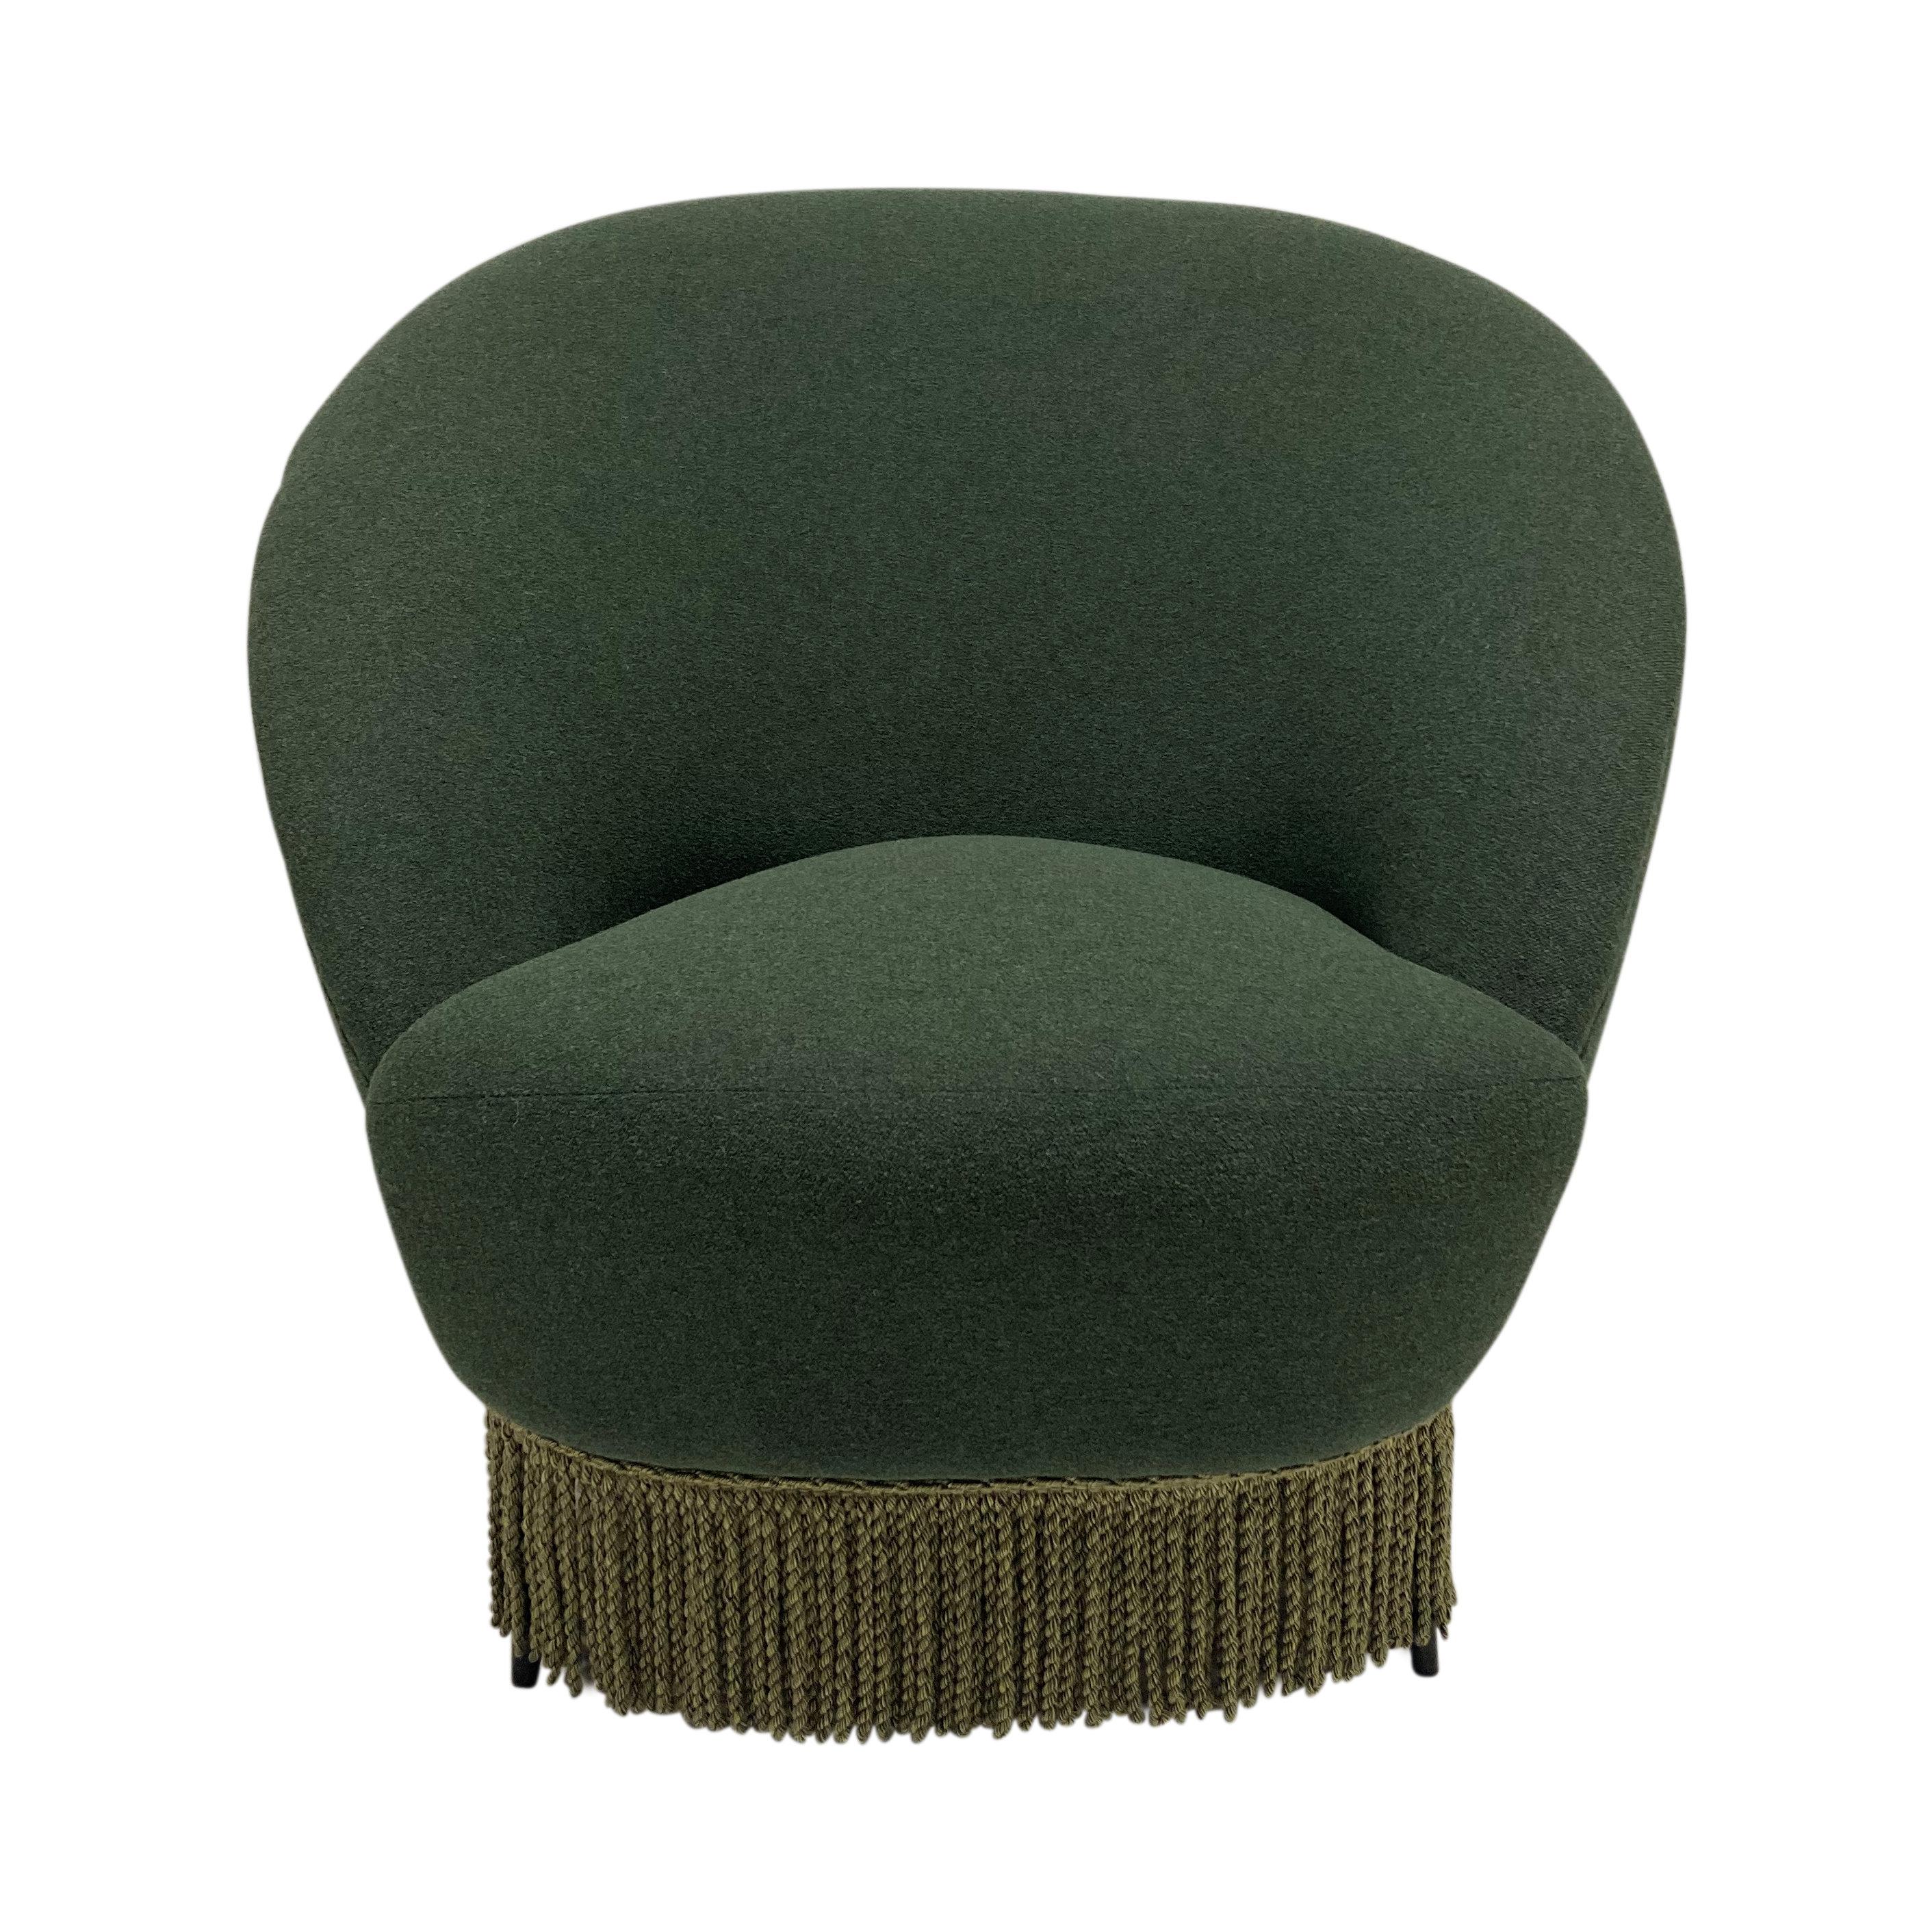 A fine pair of Italian sculptural armchairs by Federico Munari. Designed to be both beautiful and comfortable. On tapering black lacquered feet., newly upholstered in an olive green wool micro-boucle and with a lighter olive green tassel fringe.